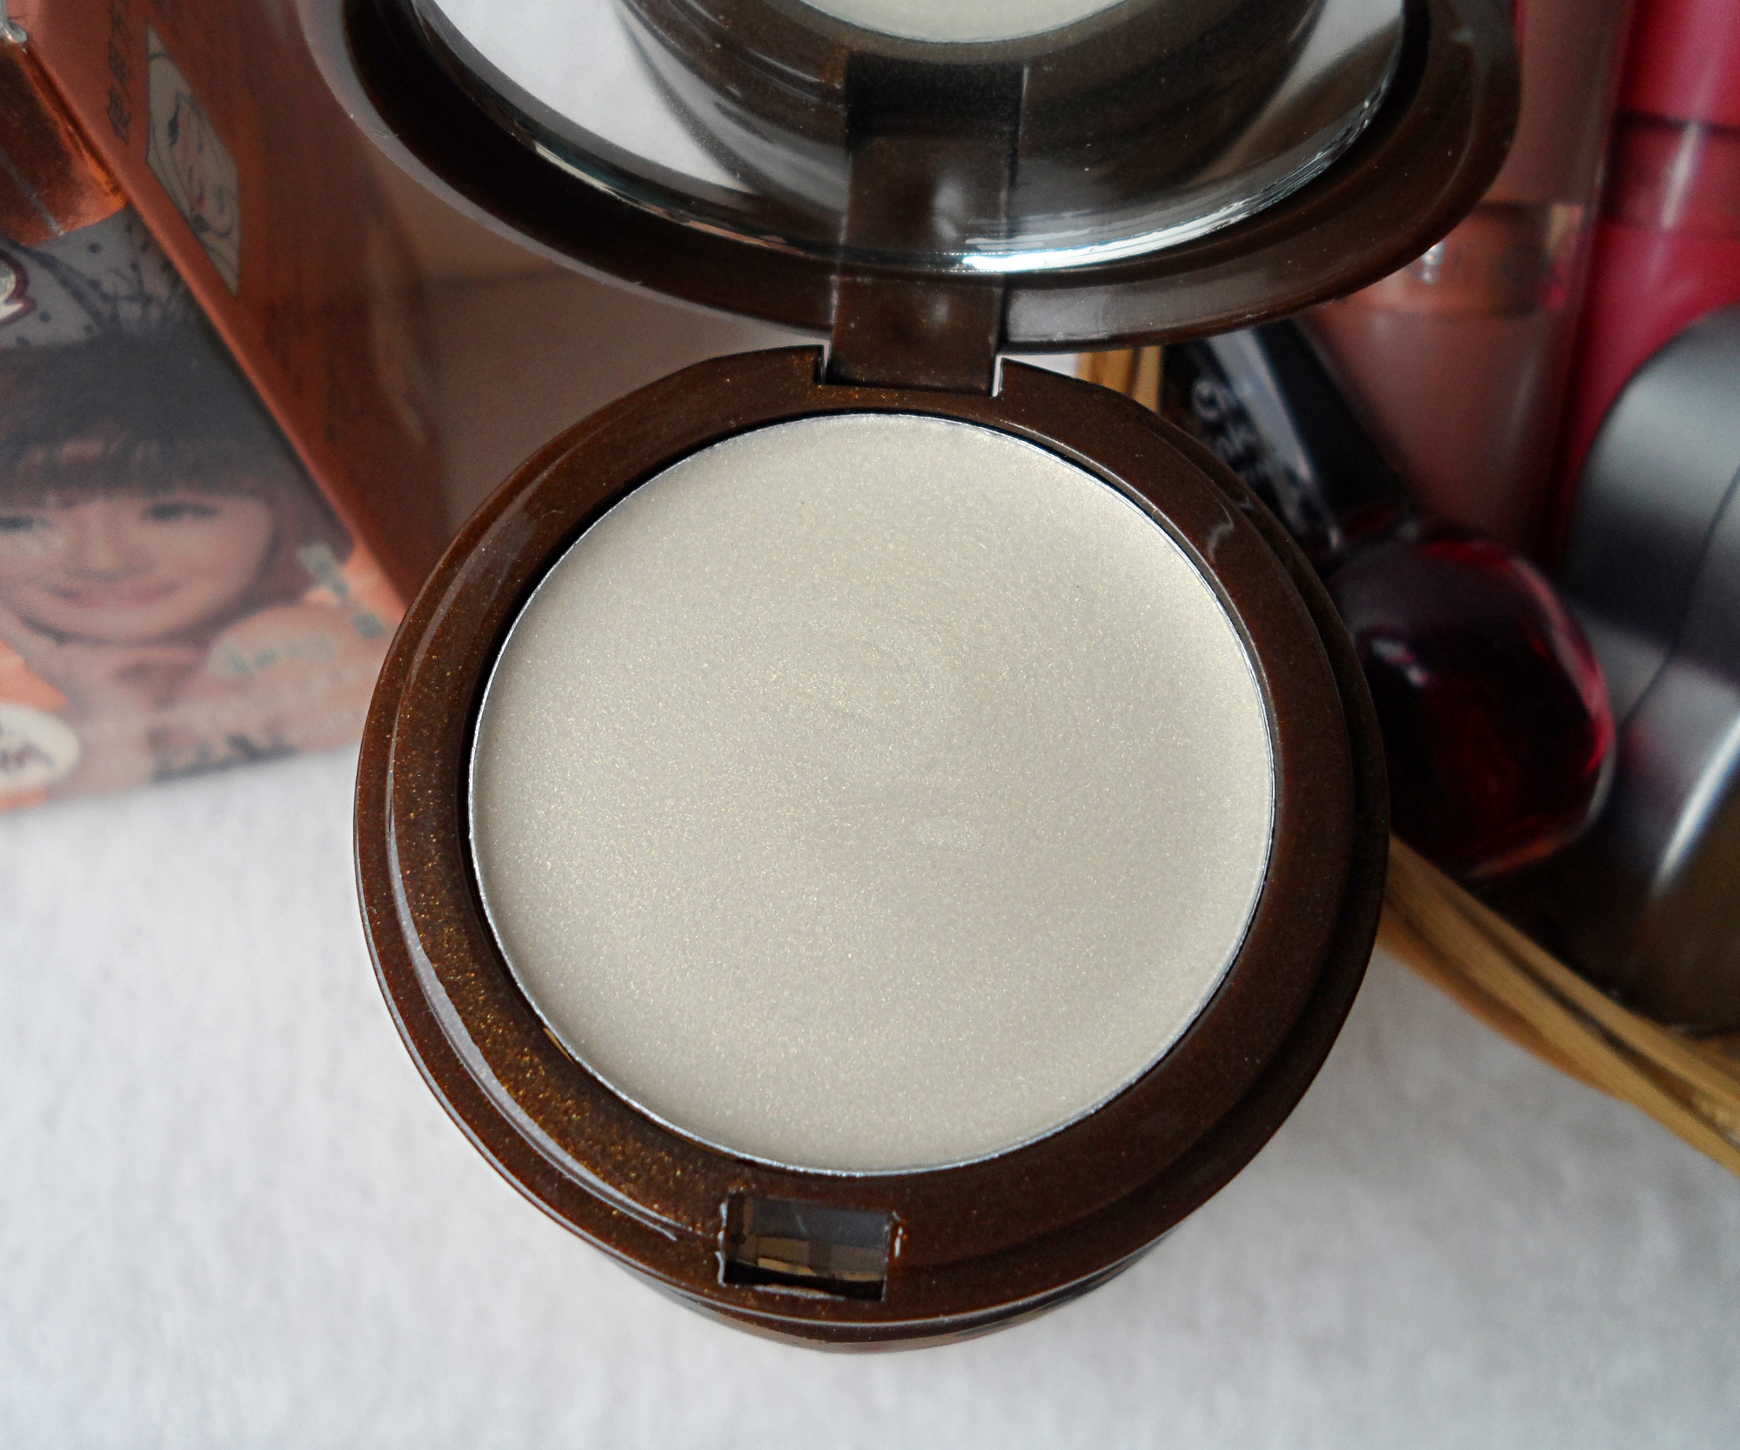 peach-golden highlighter beauty review, pictures and swatches by blogger